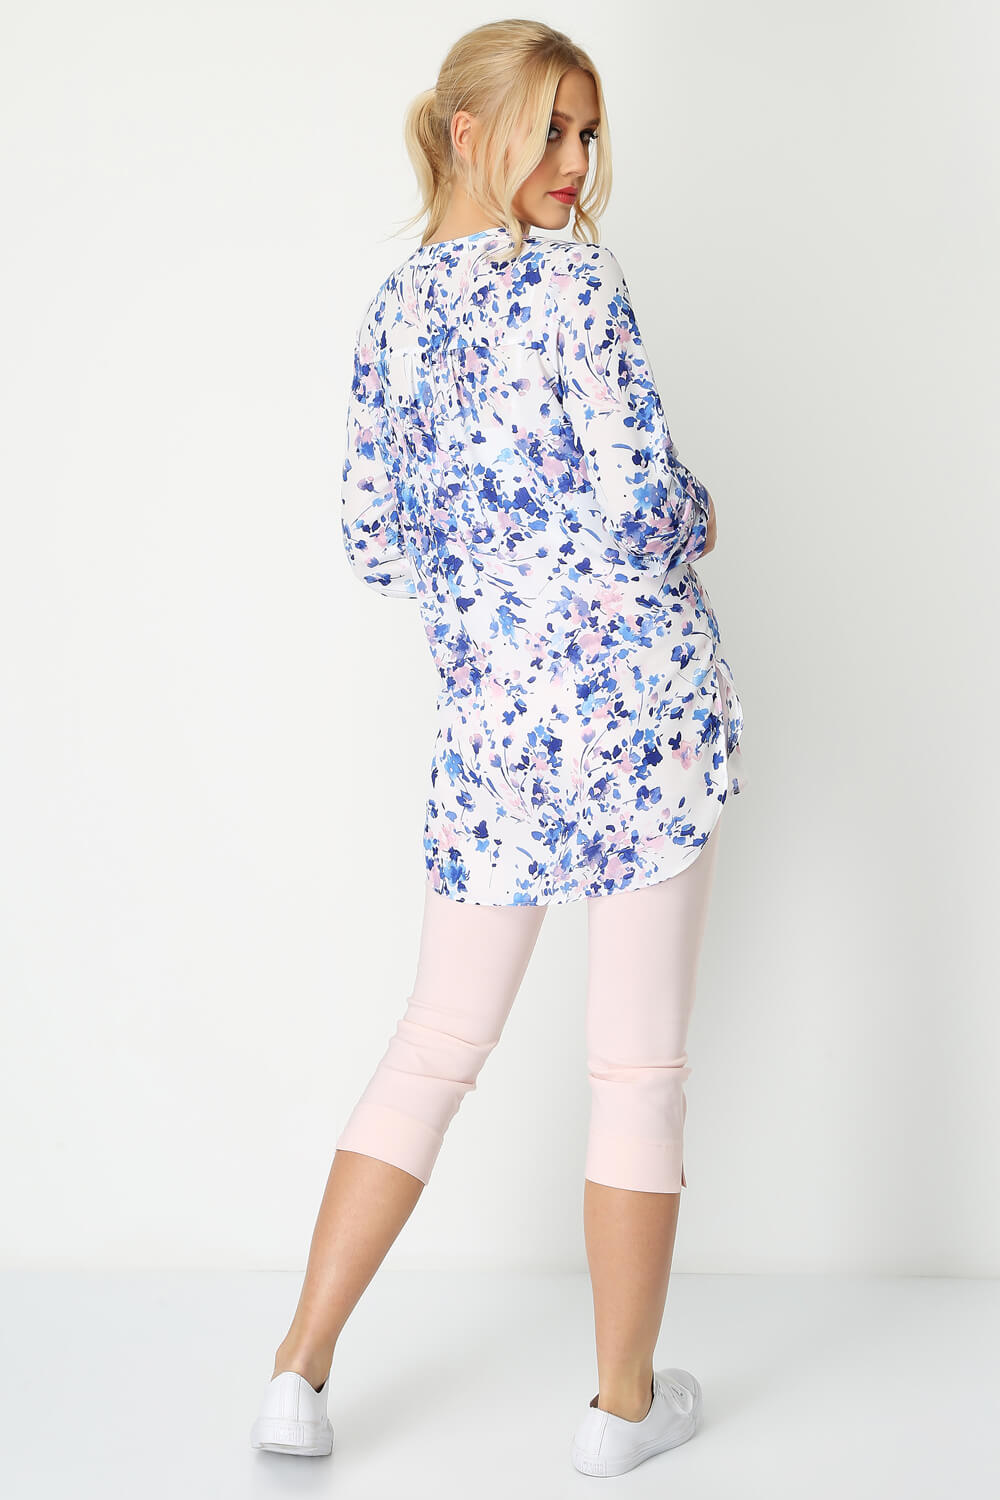 Blue Floral Print Roll Sleeve Shirt , Image 3 of 8